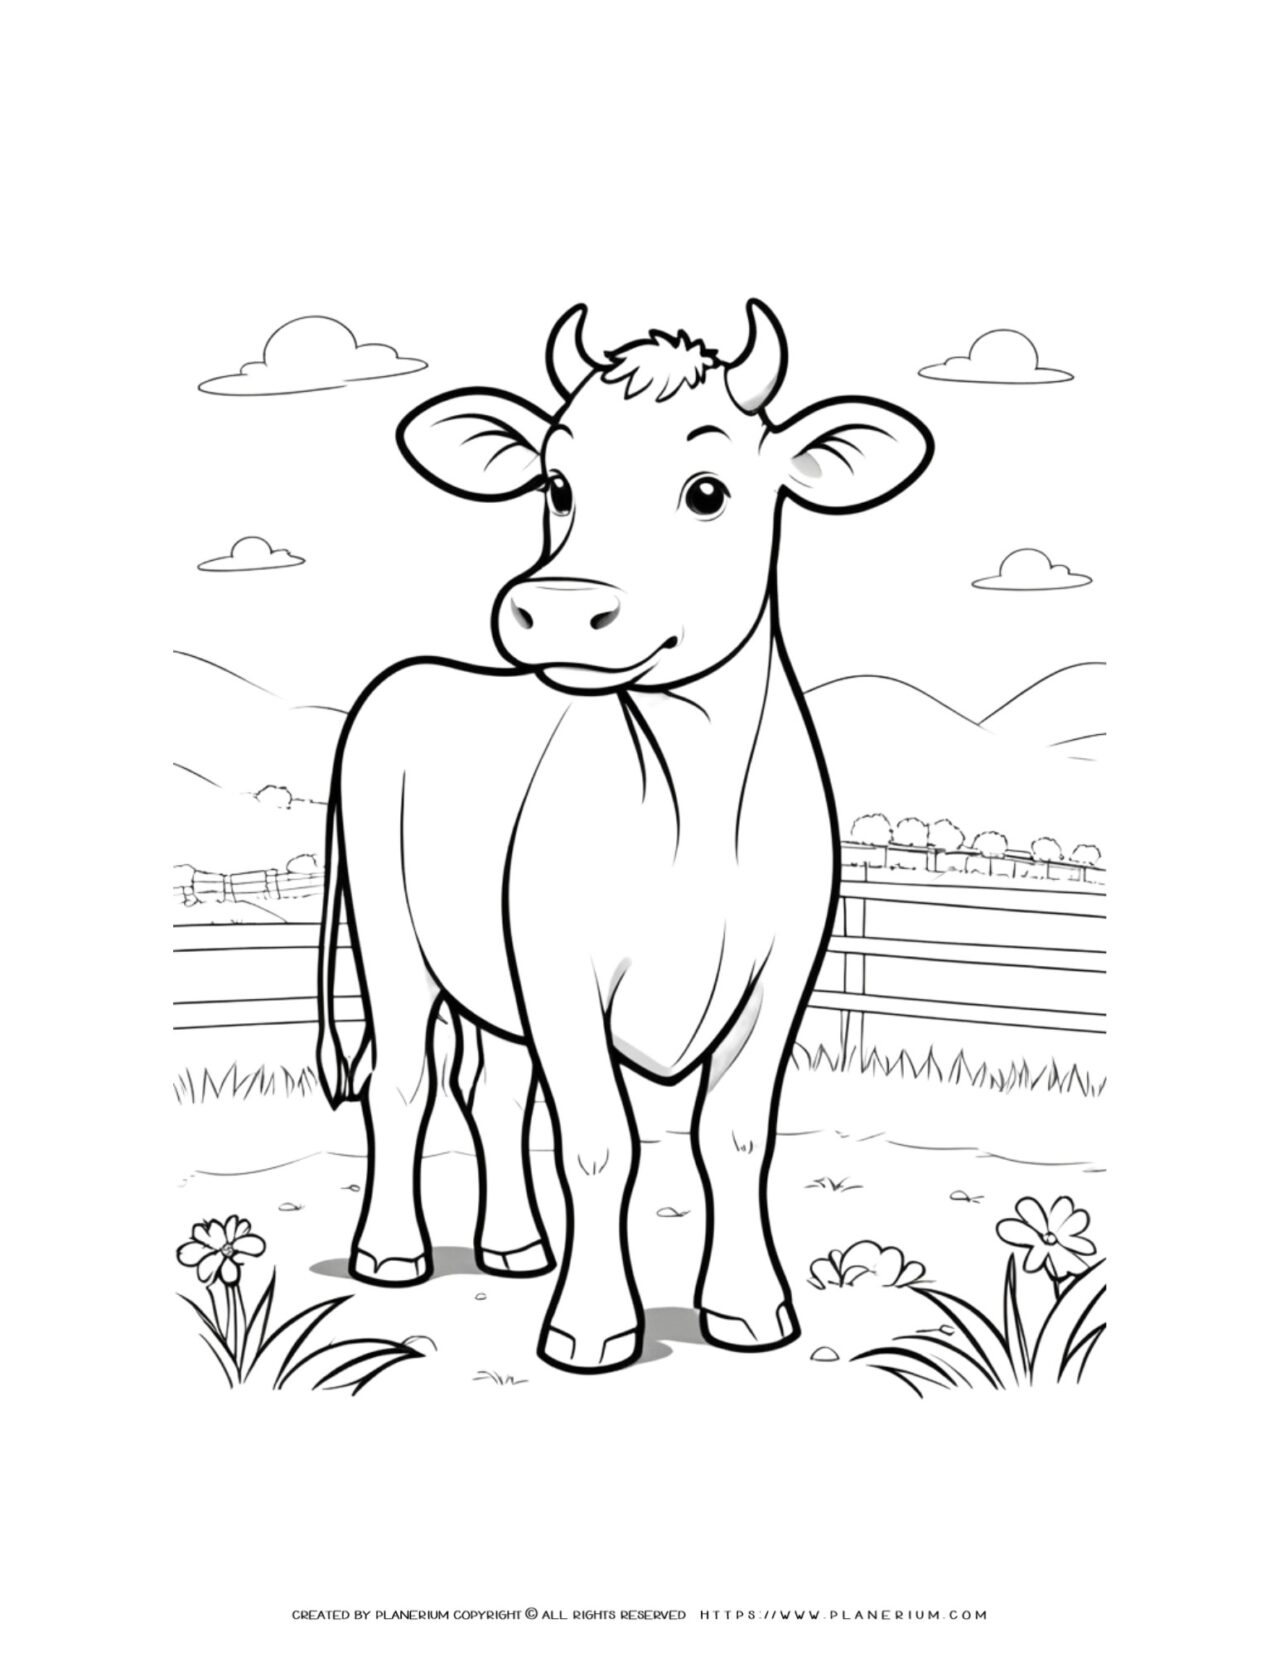 cow-illustration-animal-coloring-page-for-kids